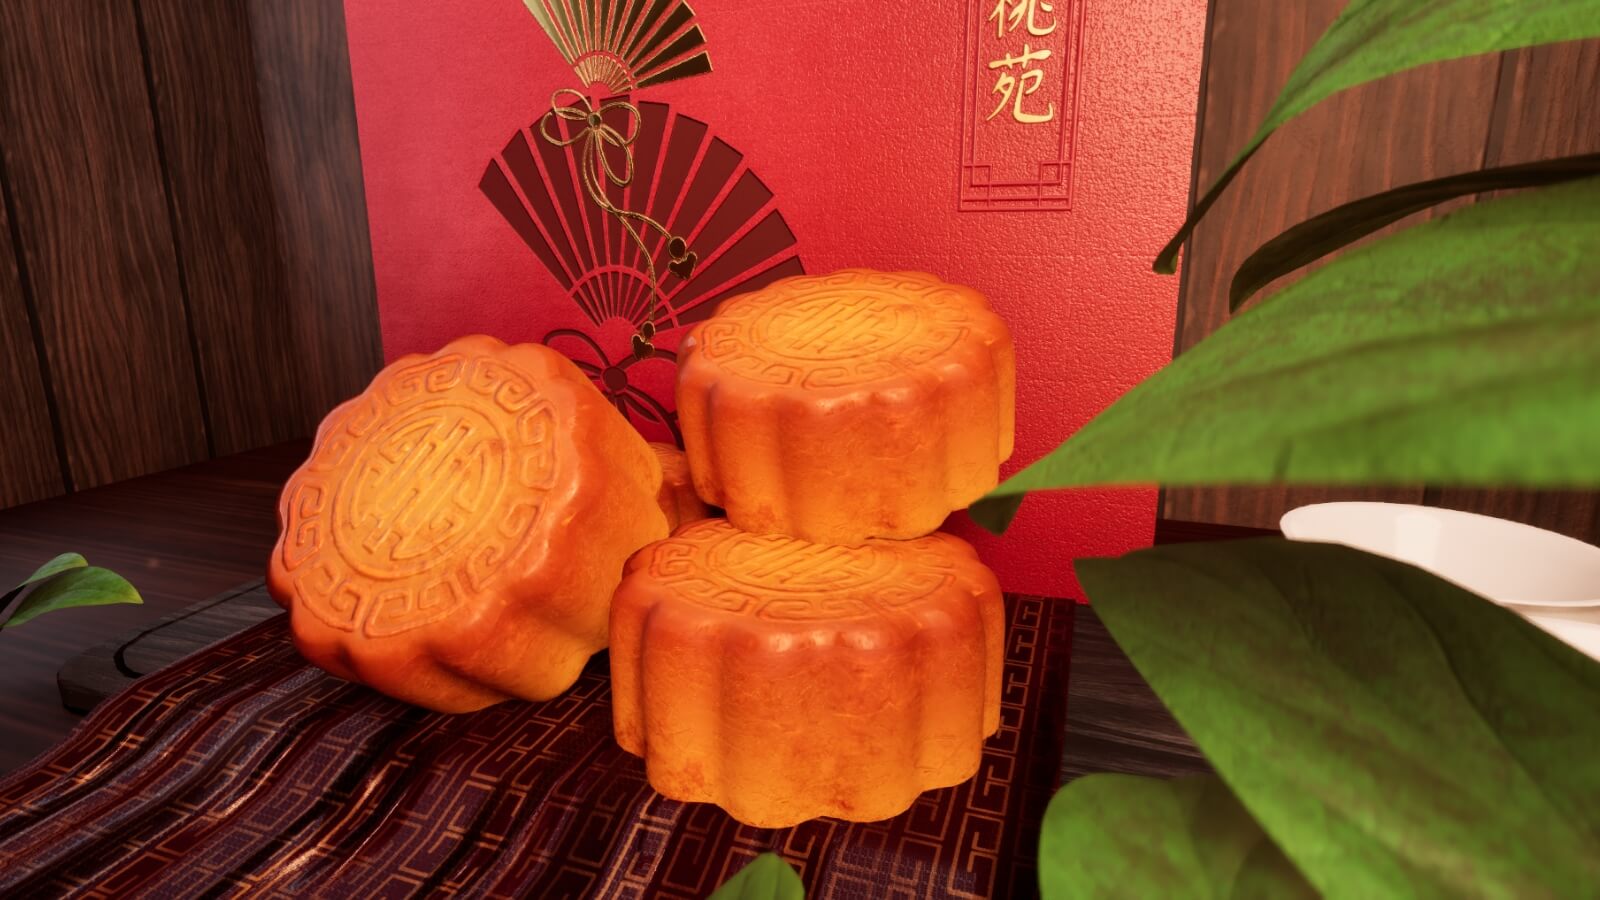 A close up of mooncakes in front of a red box.